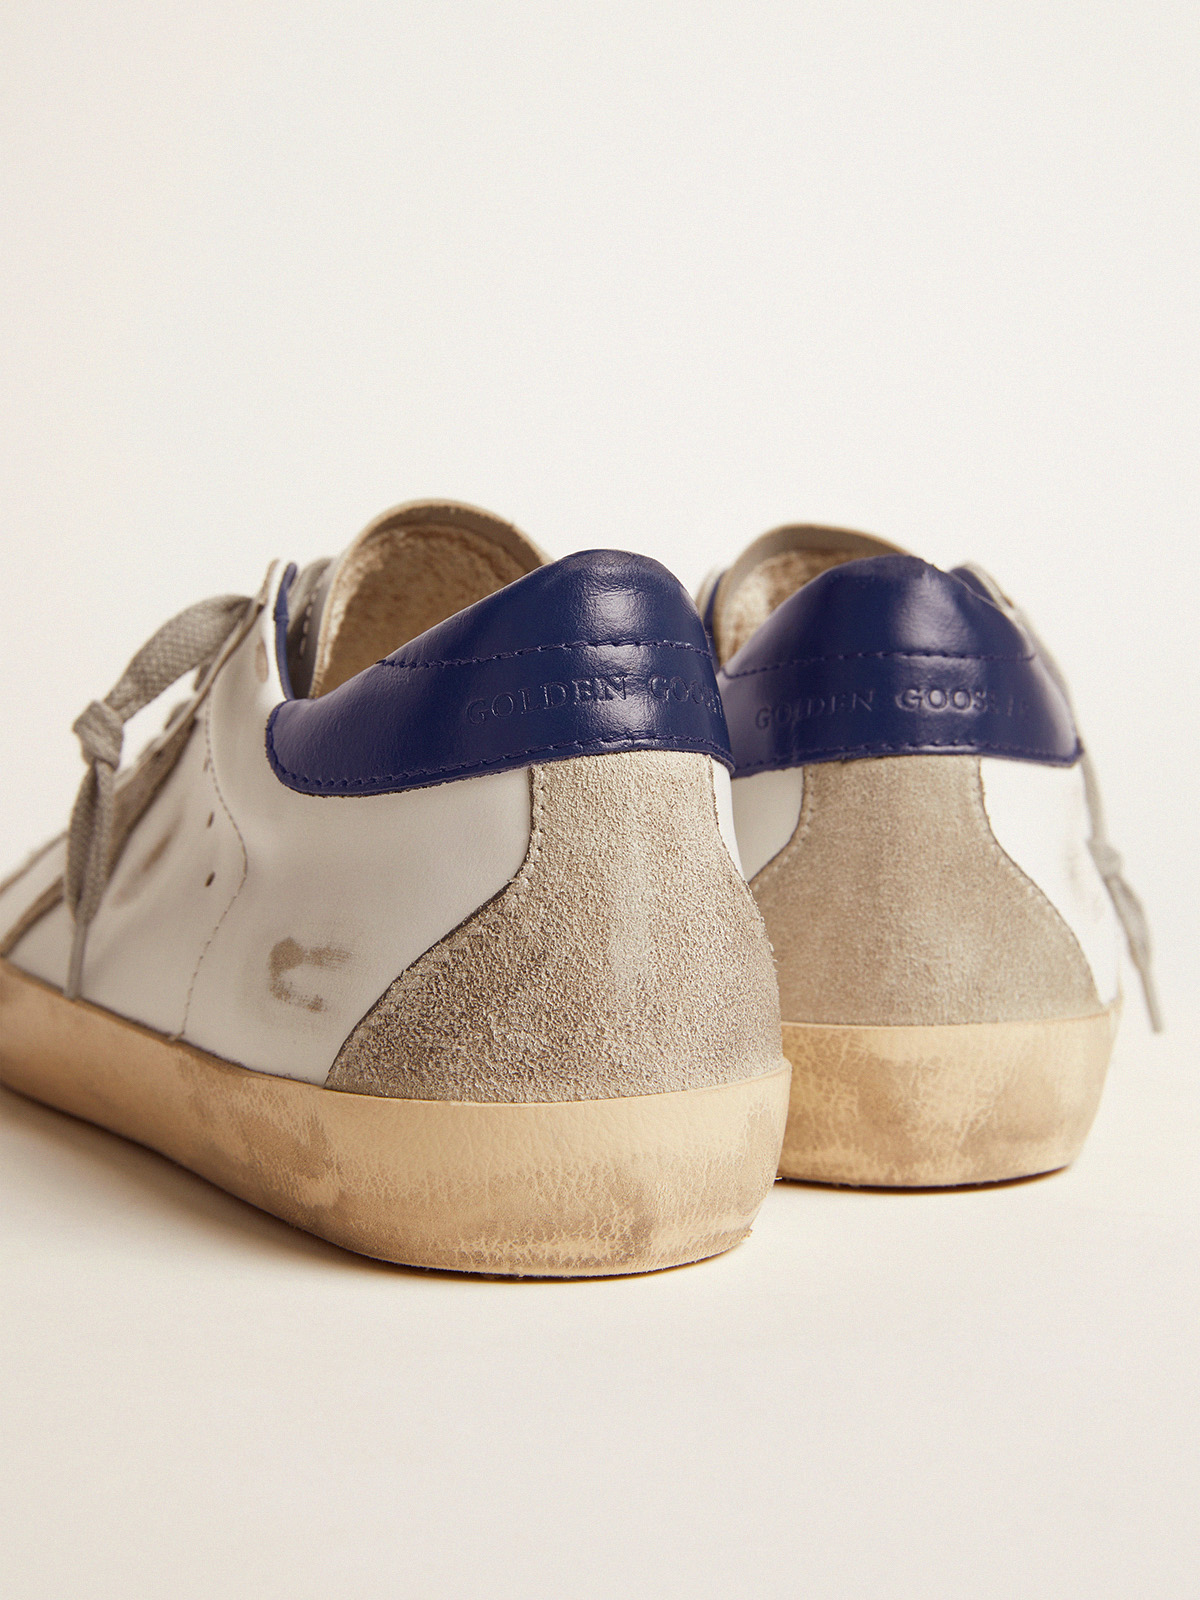 Men's Super-Star sneakers with suede star and blue heel tab 